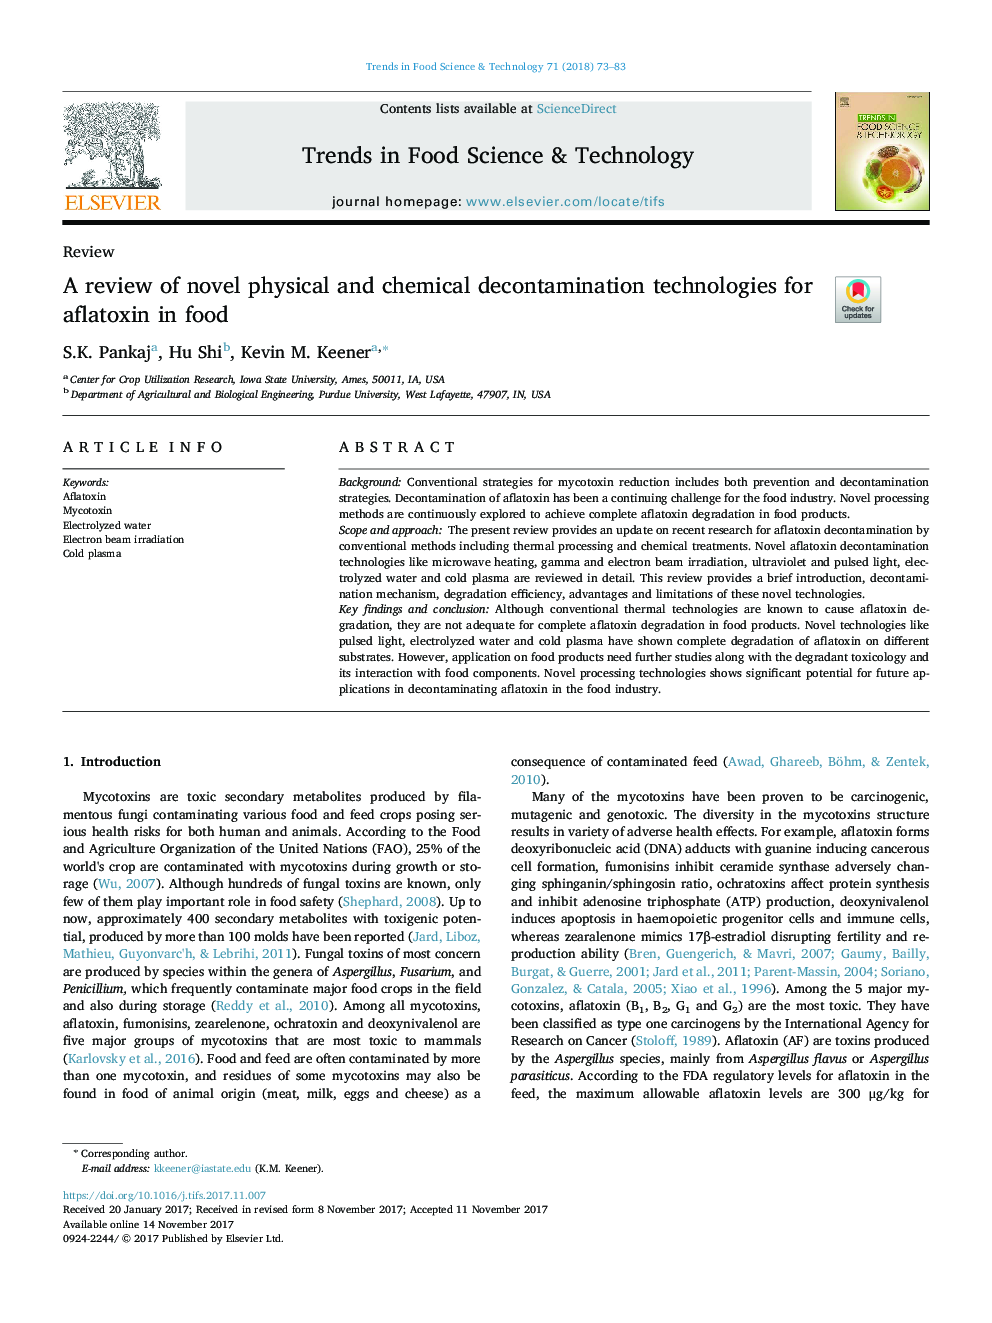 A review of novel physical and chemical decontamination technologies for aflatoxin in food